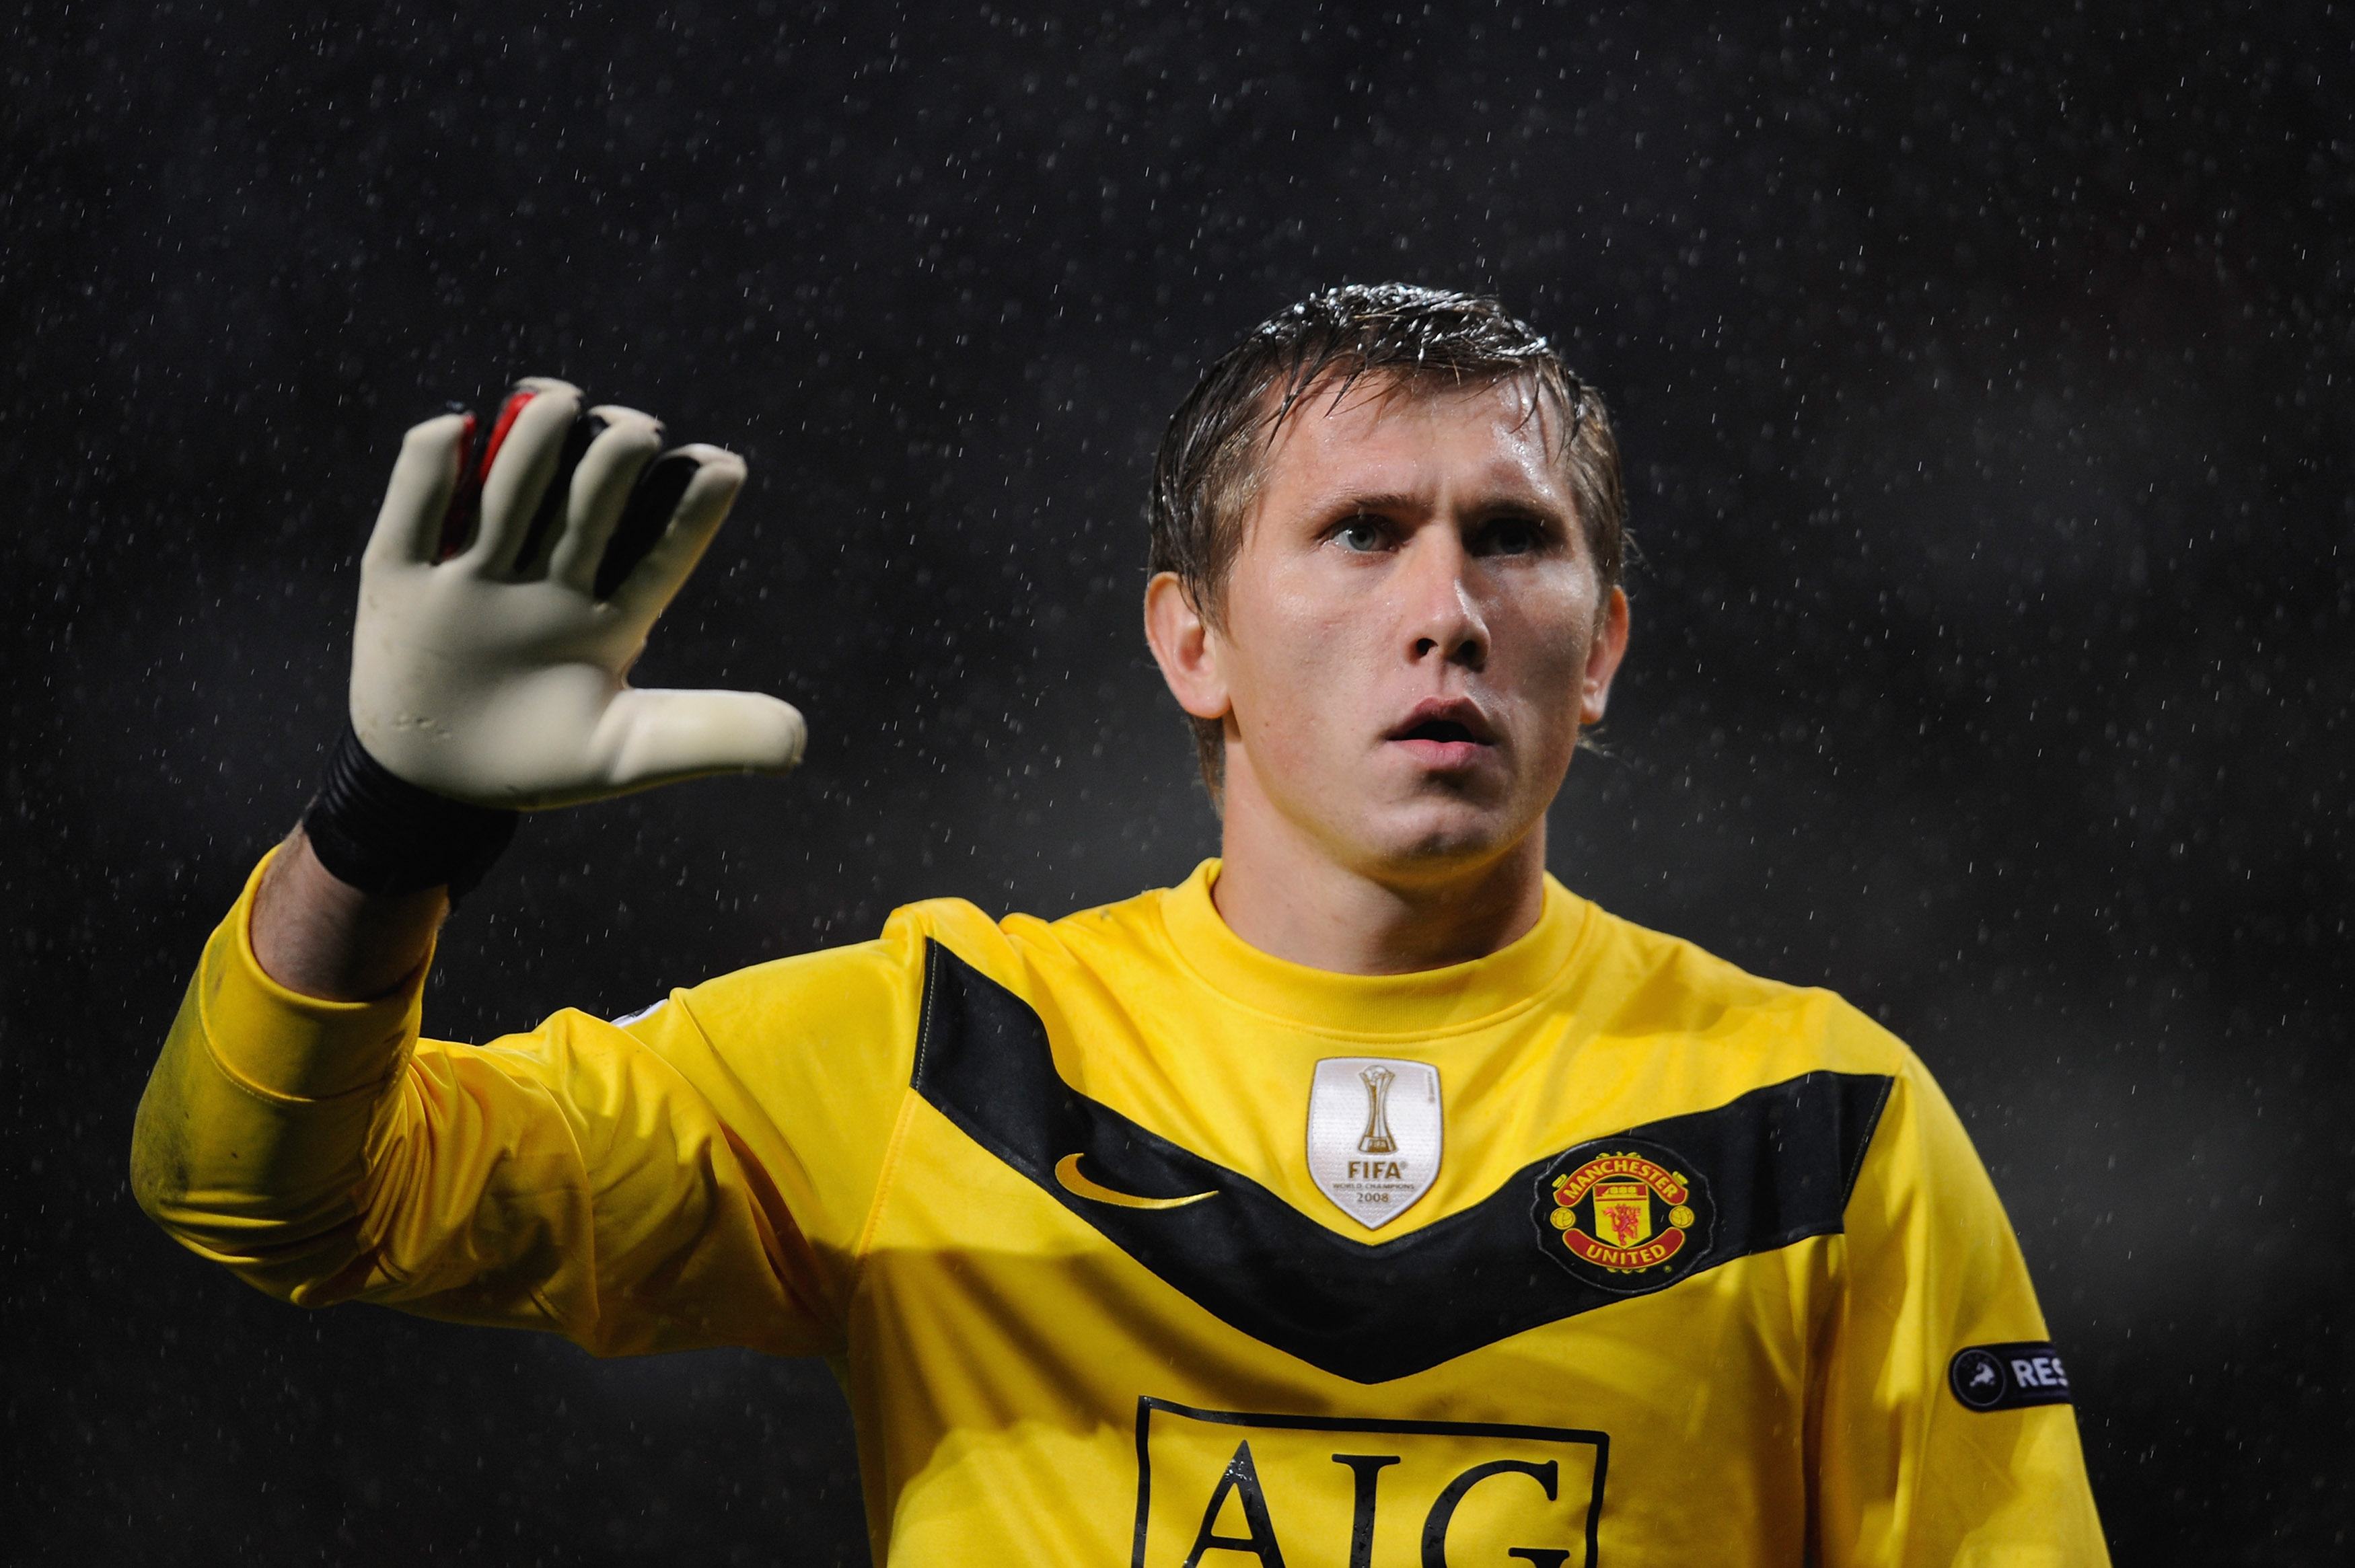 MANCHESTER, ENGLAND - SEPTEMBER 30:  Tomasz Kuszczak of Manchester United gestures during the UEFA Champions League Group B match between Manchester United and VfL Wolfsburg at Old Trafford on September 30, 2009 in Manchester, England.  (Photo by Michael